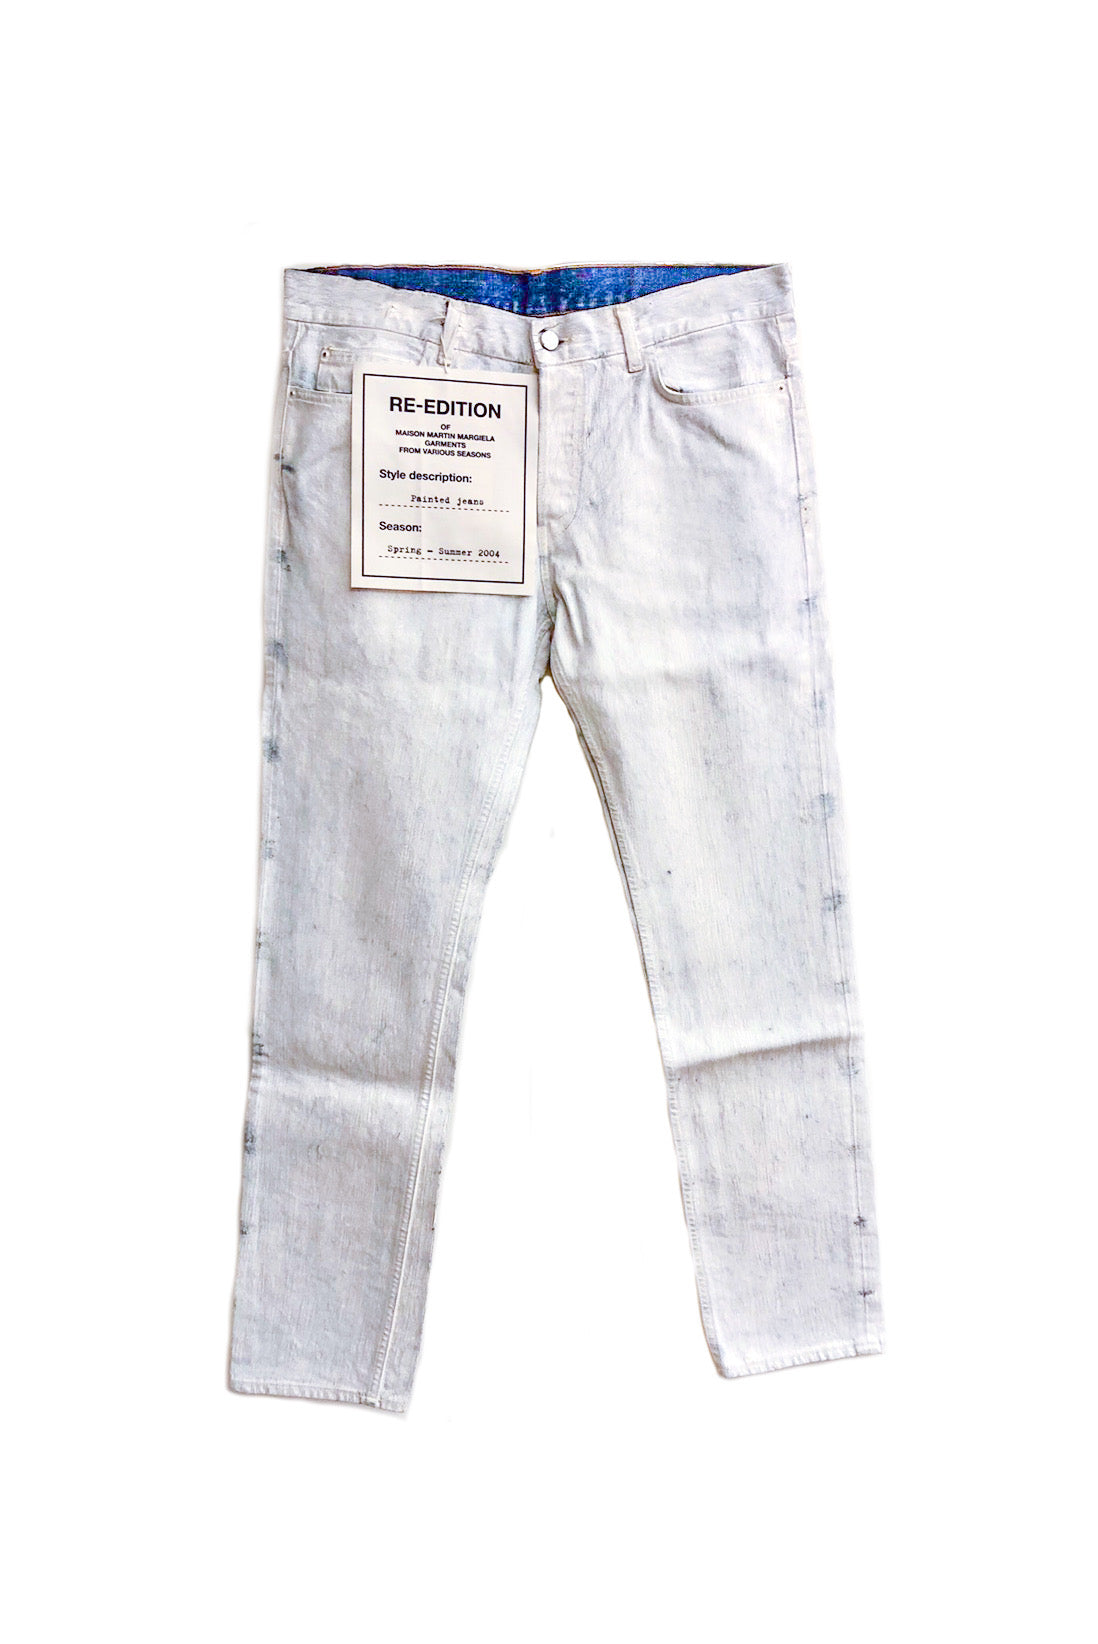 Maison Martin Margiela Re-Edition White Painted Jeans SS2004 ...